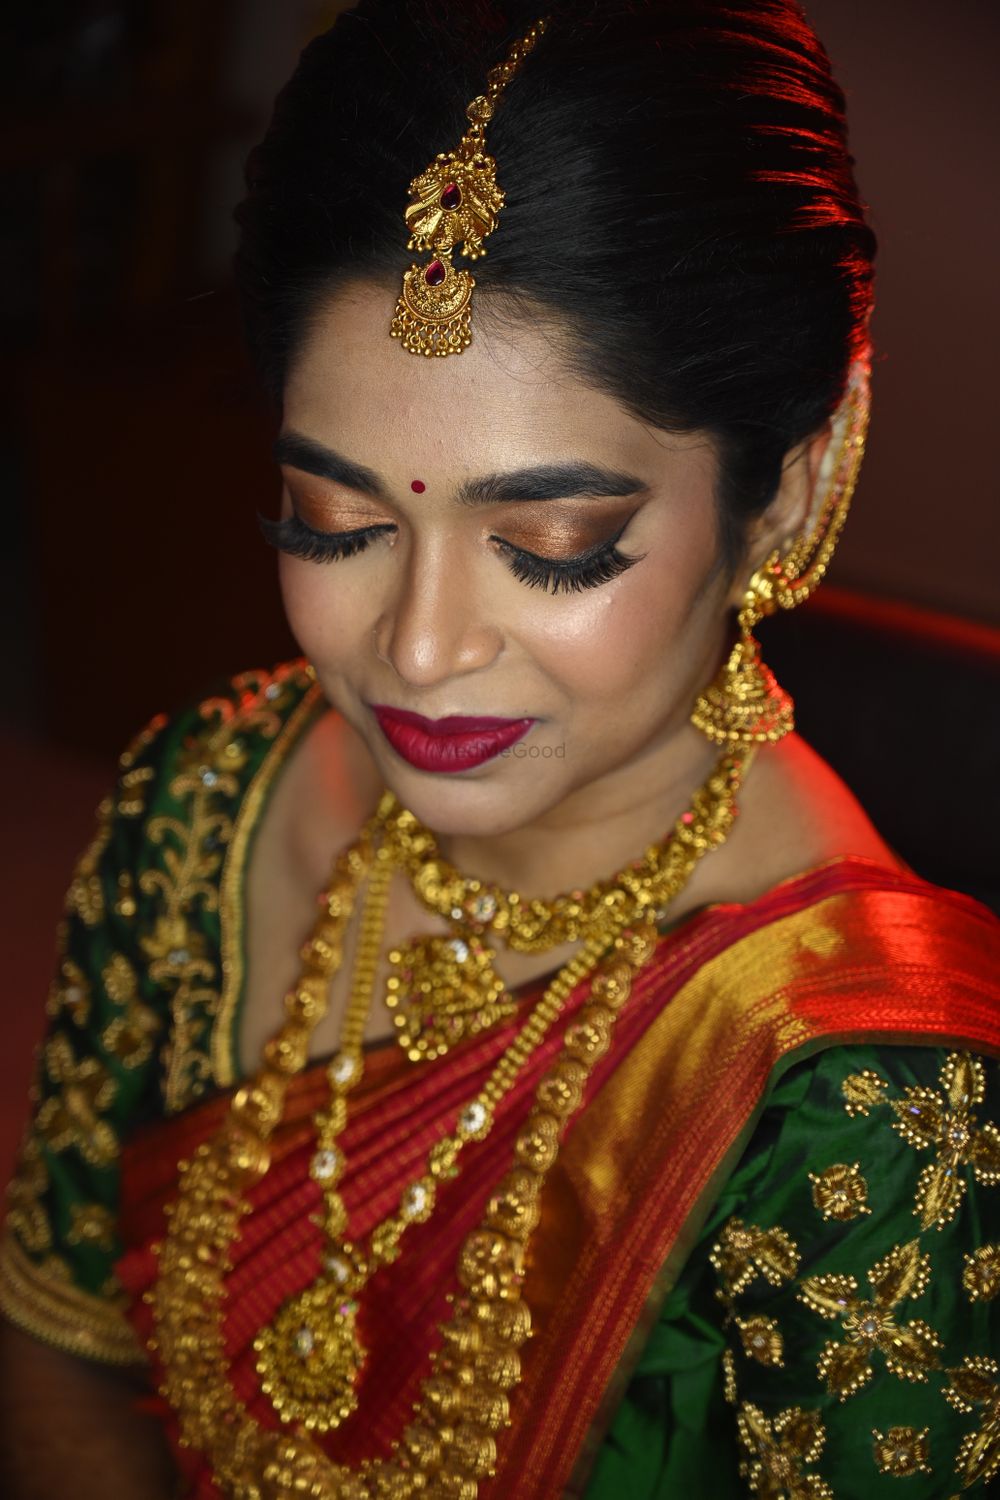 Photo By Makeup and Hair by Teju - Bridal Makeup